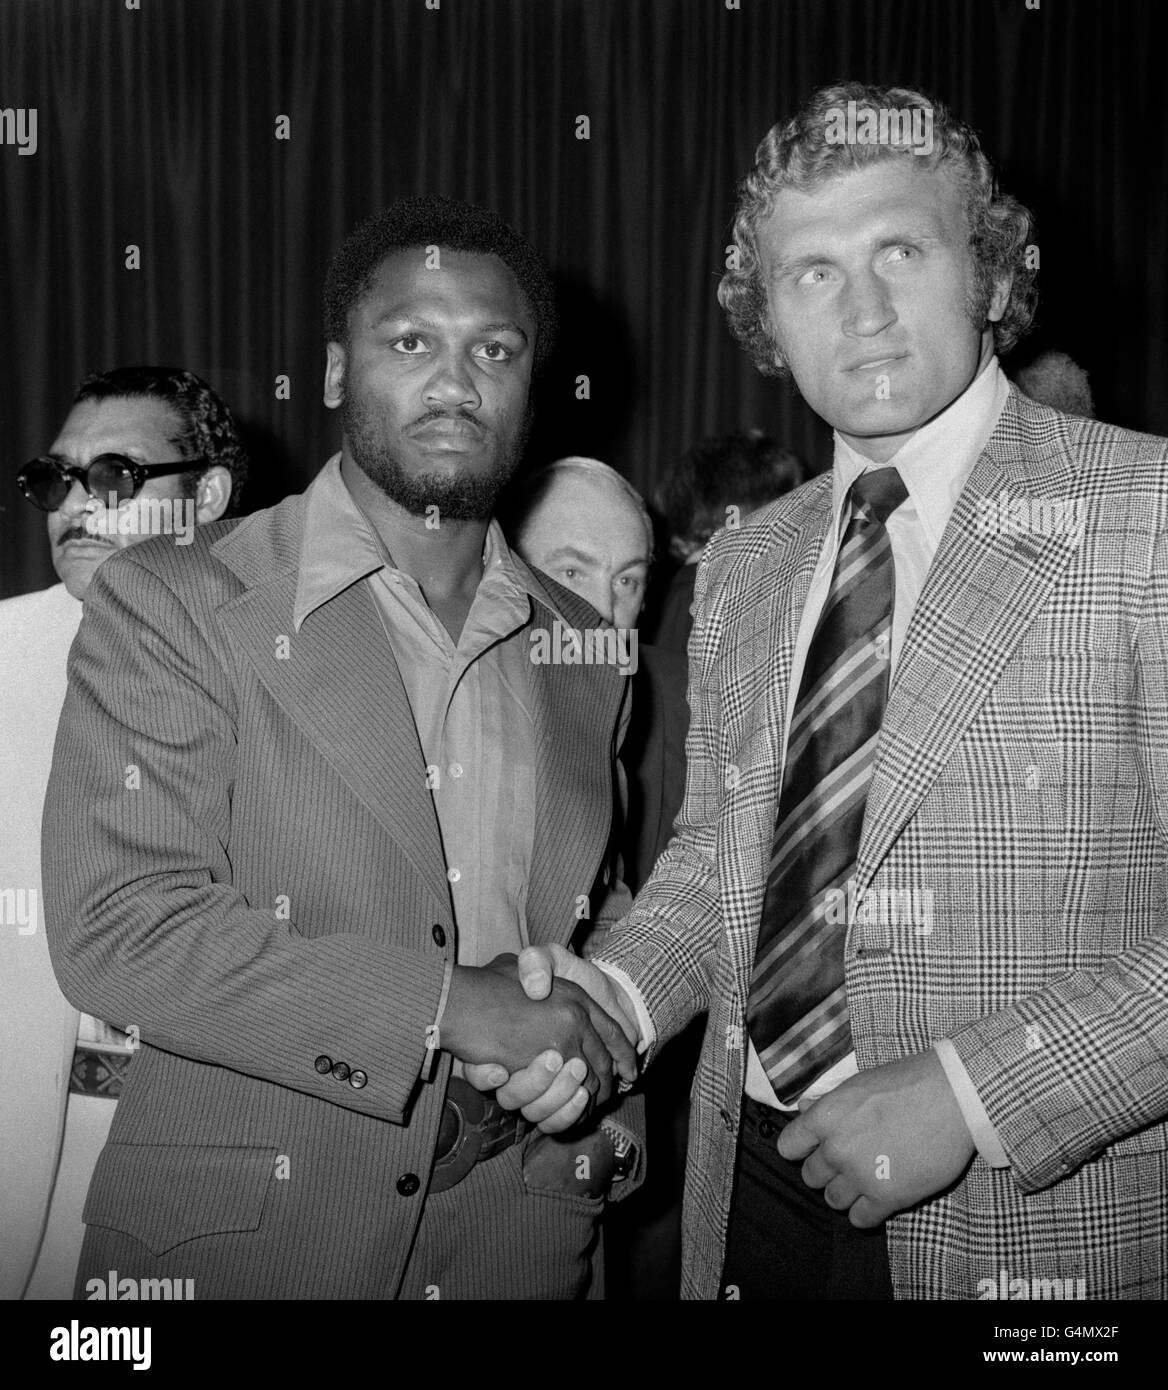 'Smokin' Joe Frazier (l) shakes hands with Joe Bugner (r) at a press conference ahead of their fight to be held at Earls Court, London, on July 2nd. Joe Frazier would go on to win that fight on points after 12 rounds. Stock Photo